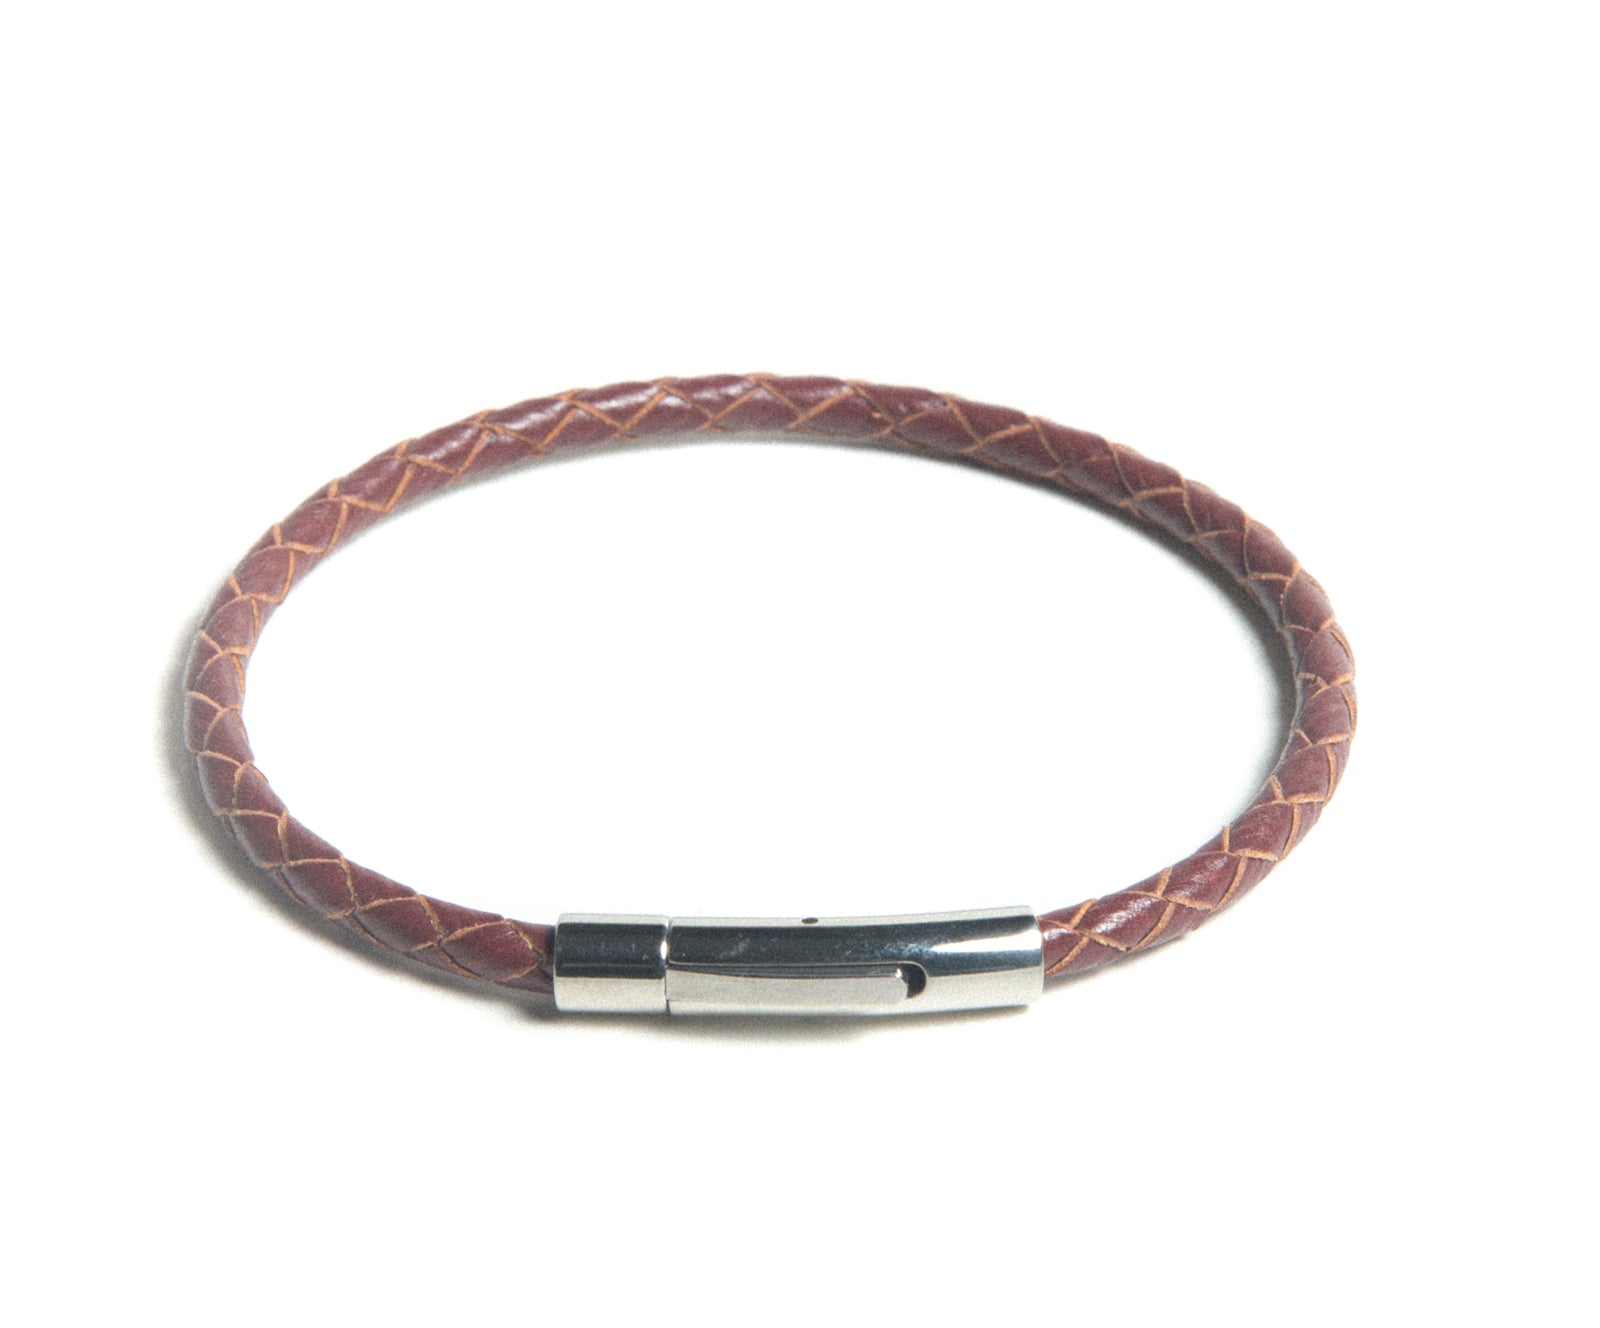 Mens Braided Handcrafted Light Brown Leather Bracelet Stainless Steel Clasp Closure at RM Kandy